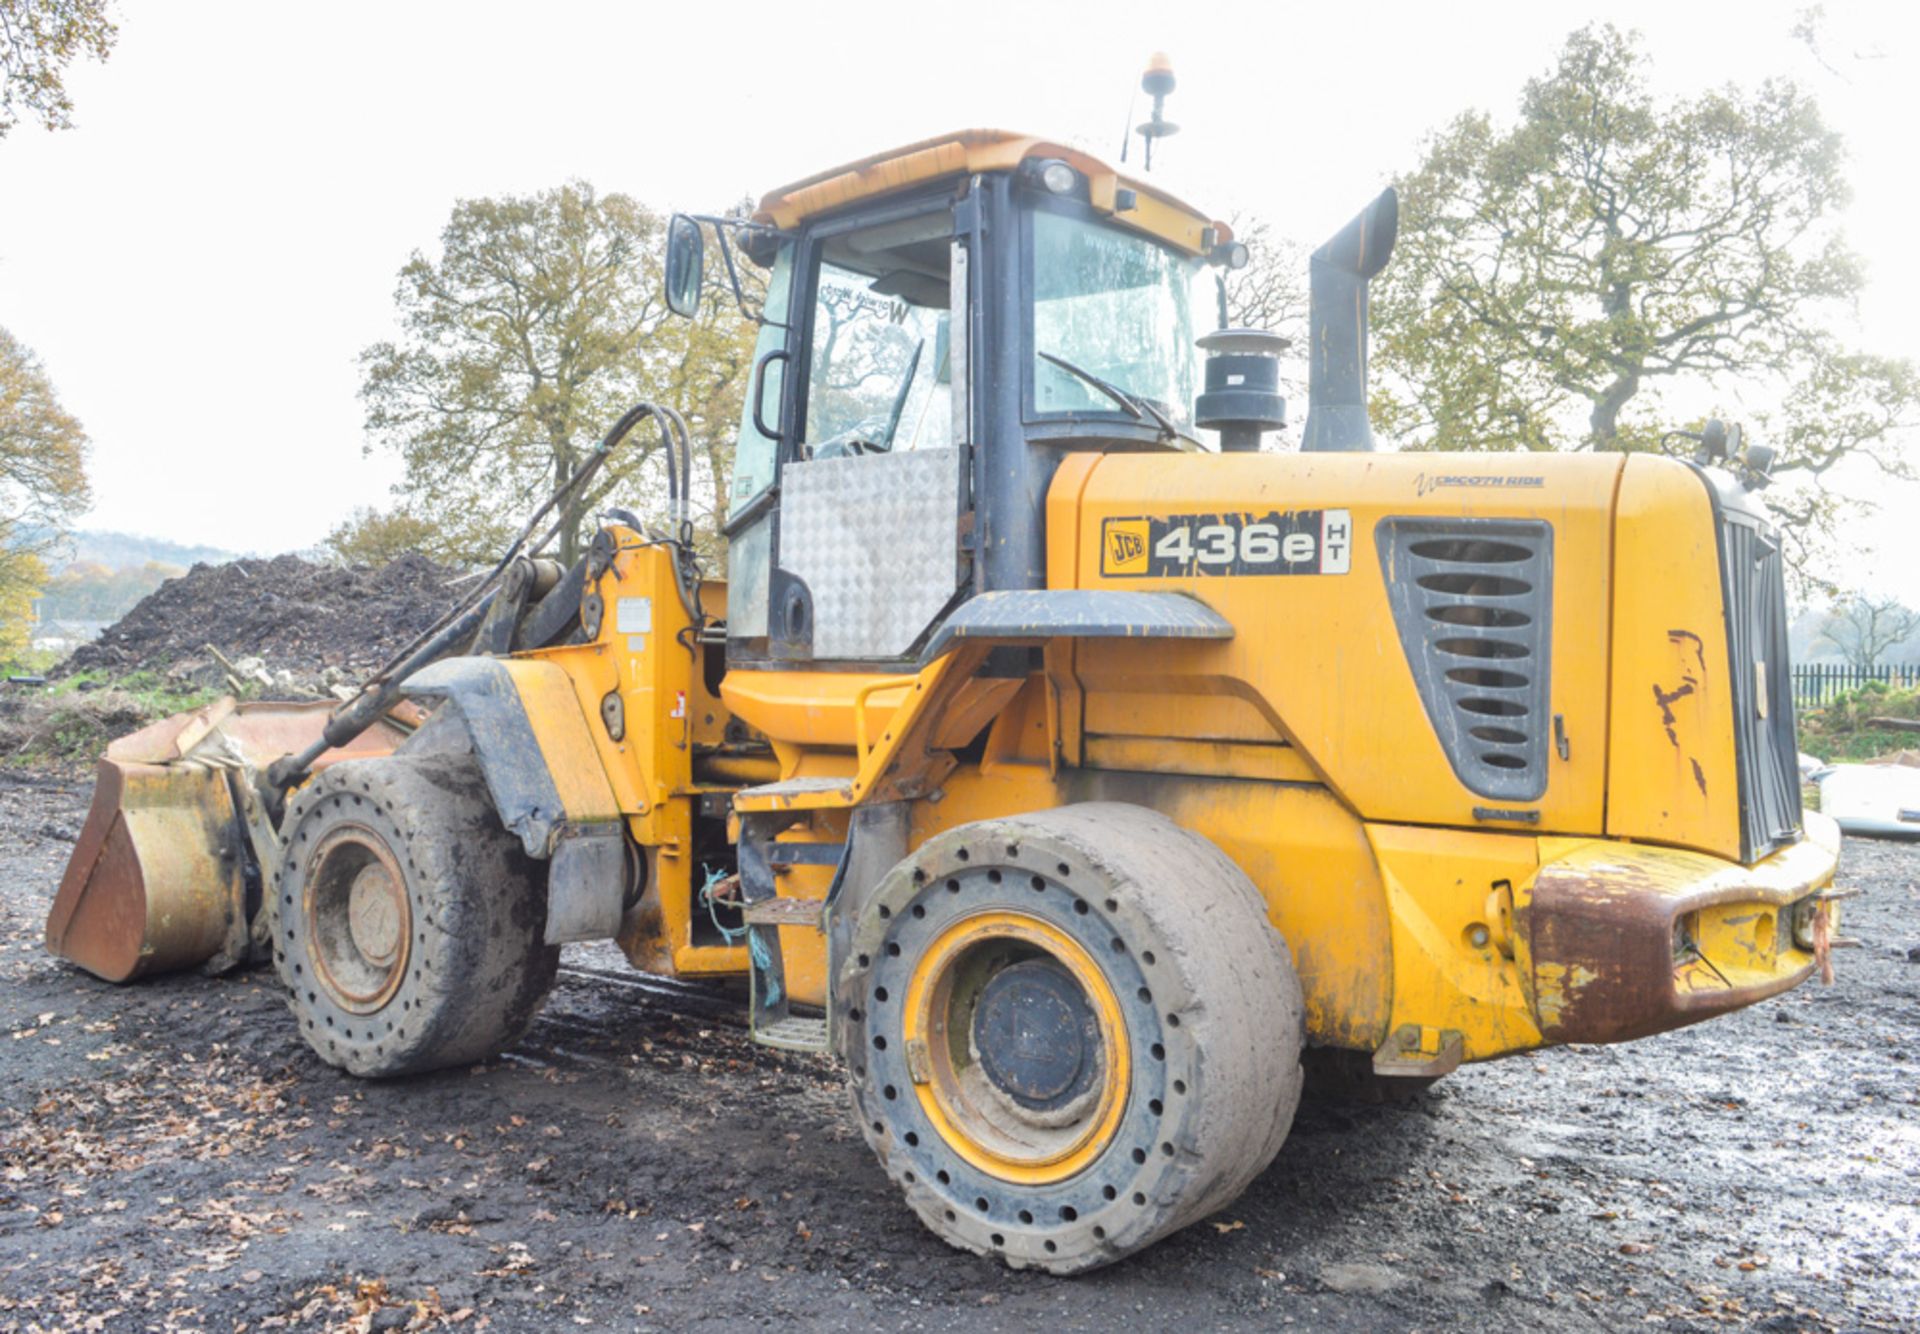 JCB 436E HT loading shovel Year: 2007 S/N: 1410067 Recorded Hours: 12,212 ** Sold as a non - Image 2 of 10